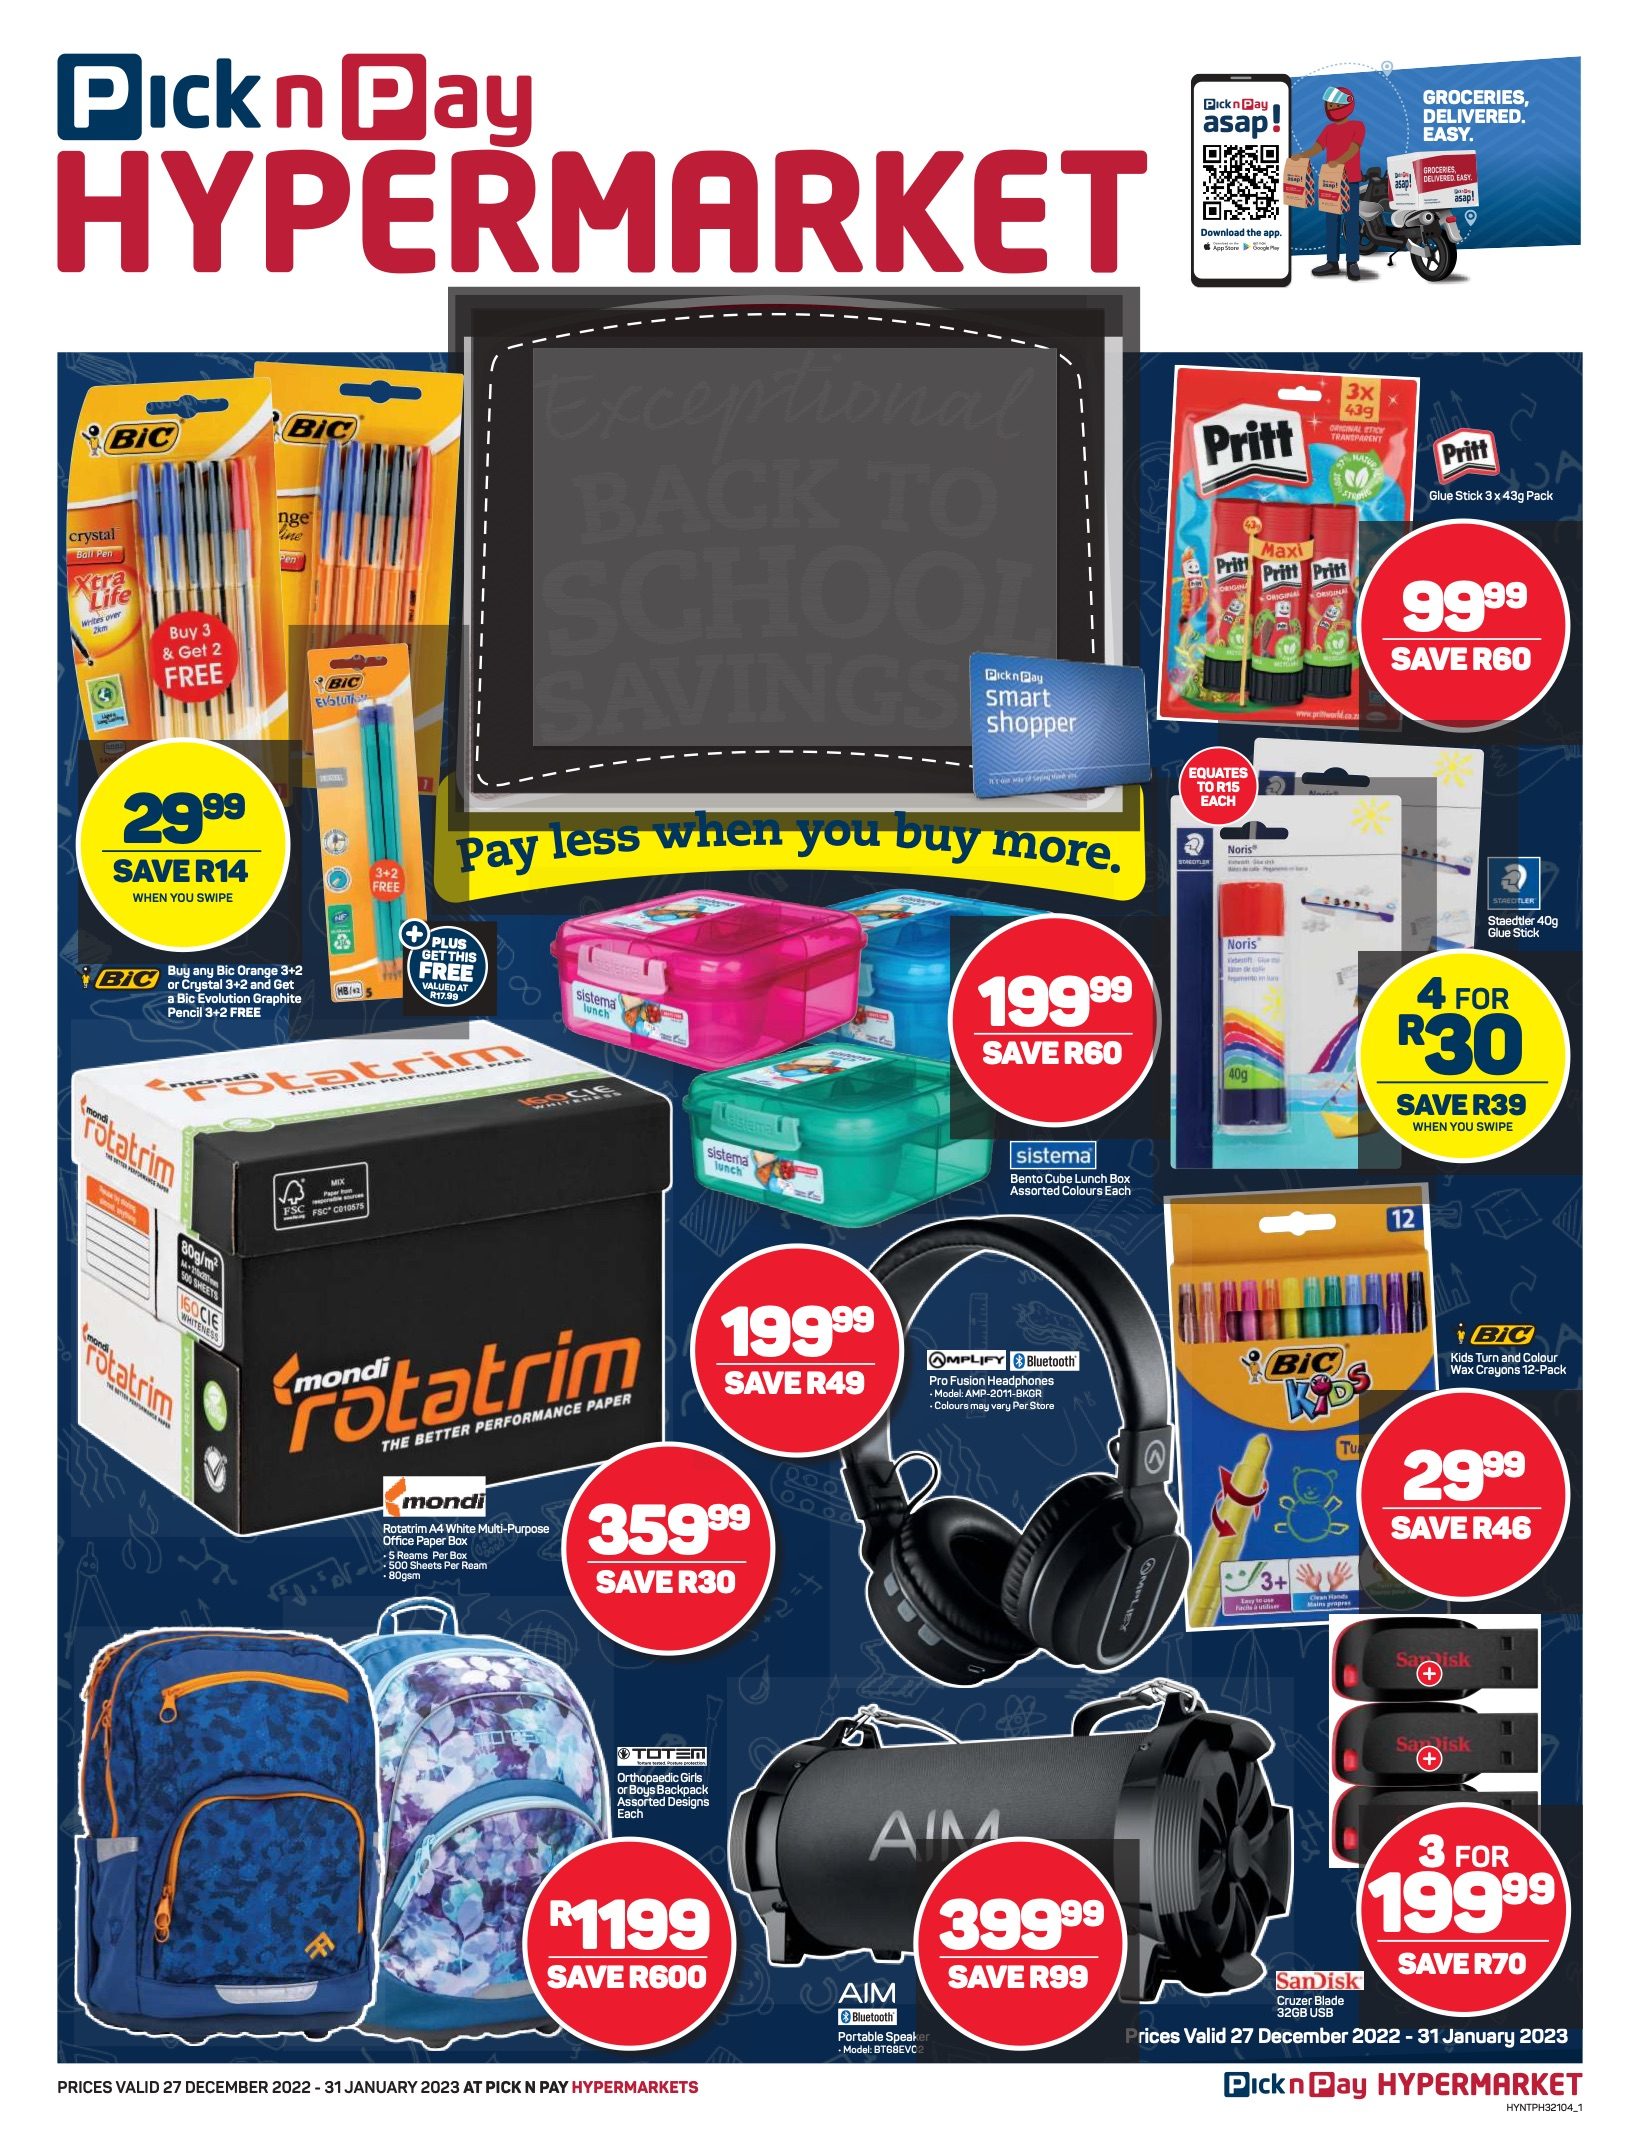 Pick n Pay Specials Back to School Savings Dec 2022